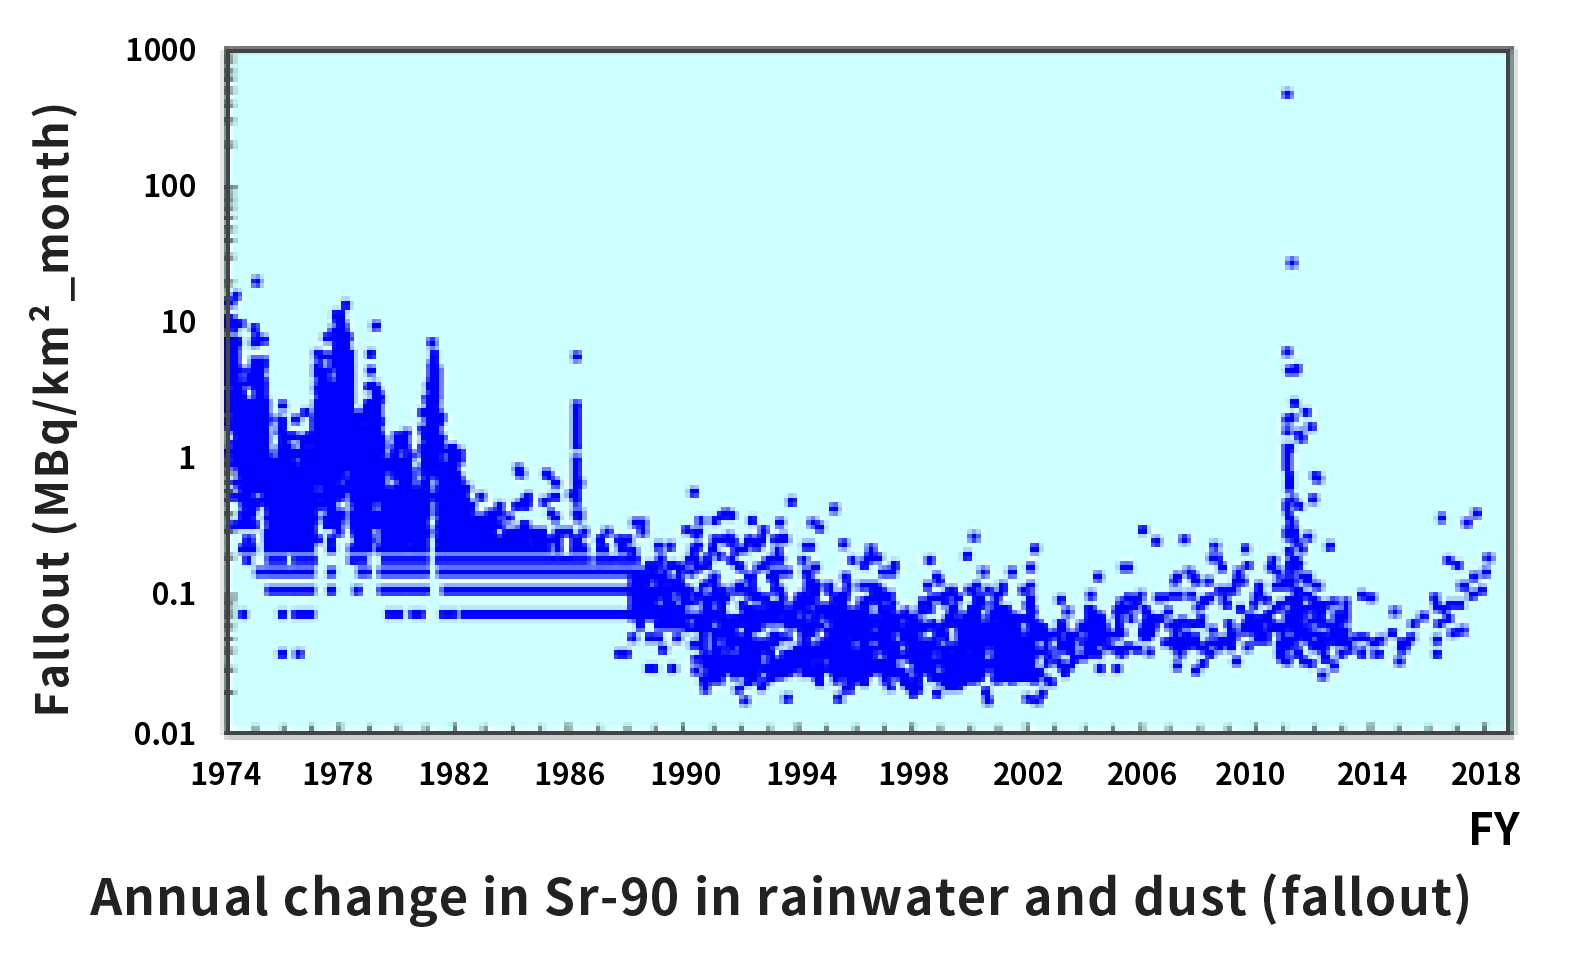 Annual change in Sr-90 in rainwater and dust (fallout)